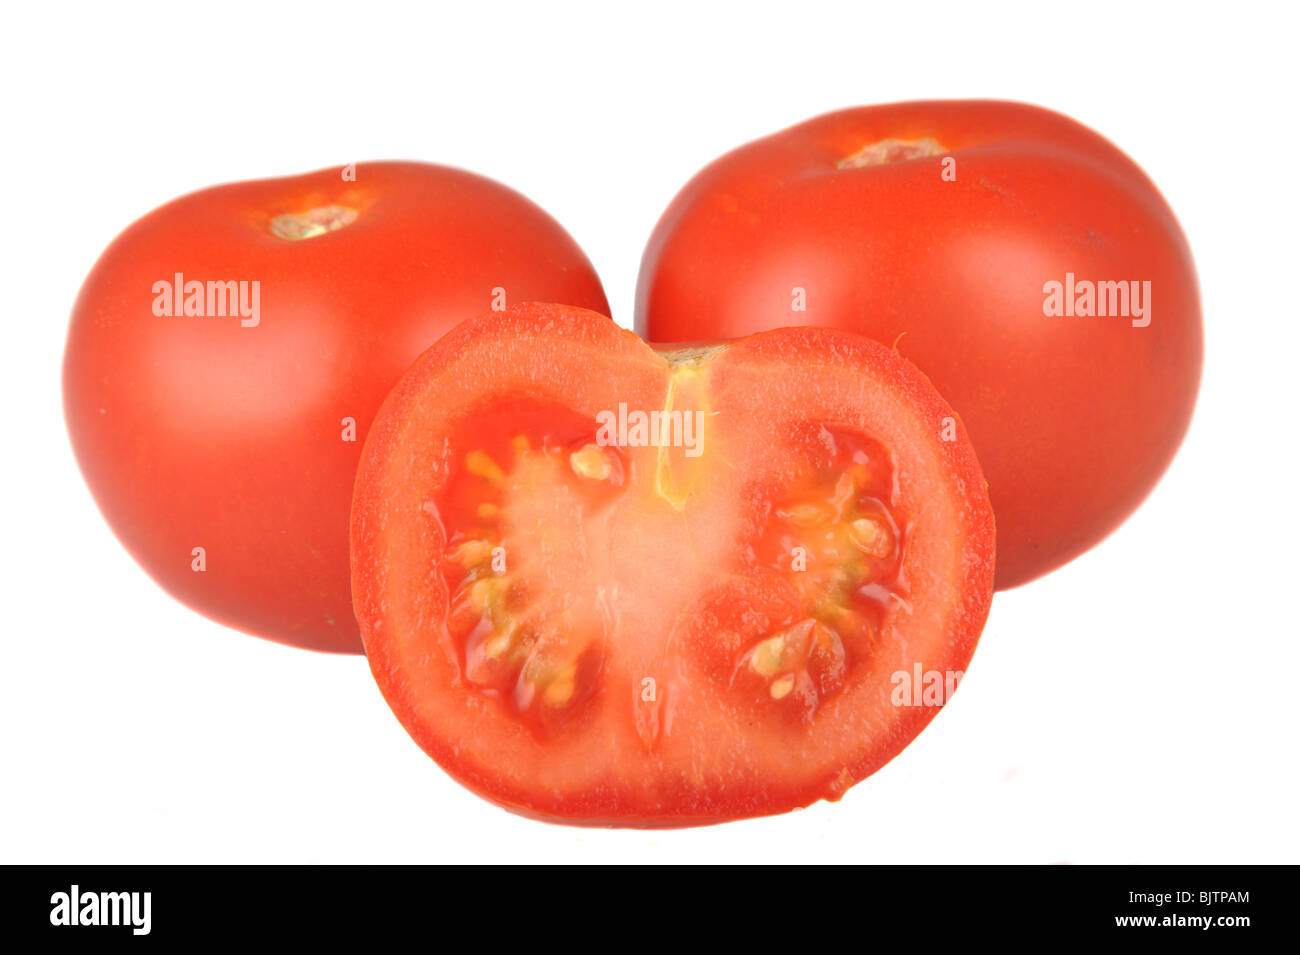 Tomatoes and half a tomato photographed in studio against a white background Stock Photo